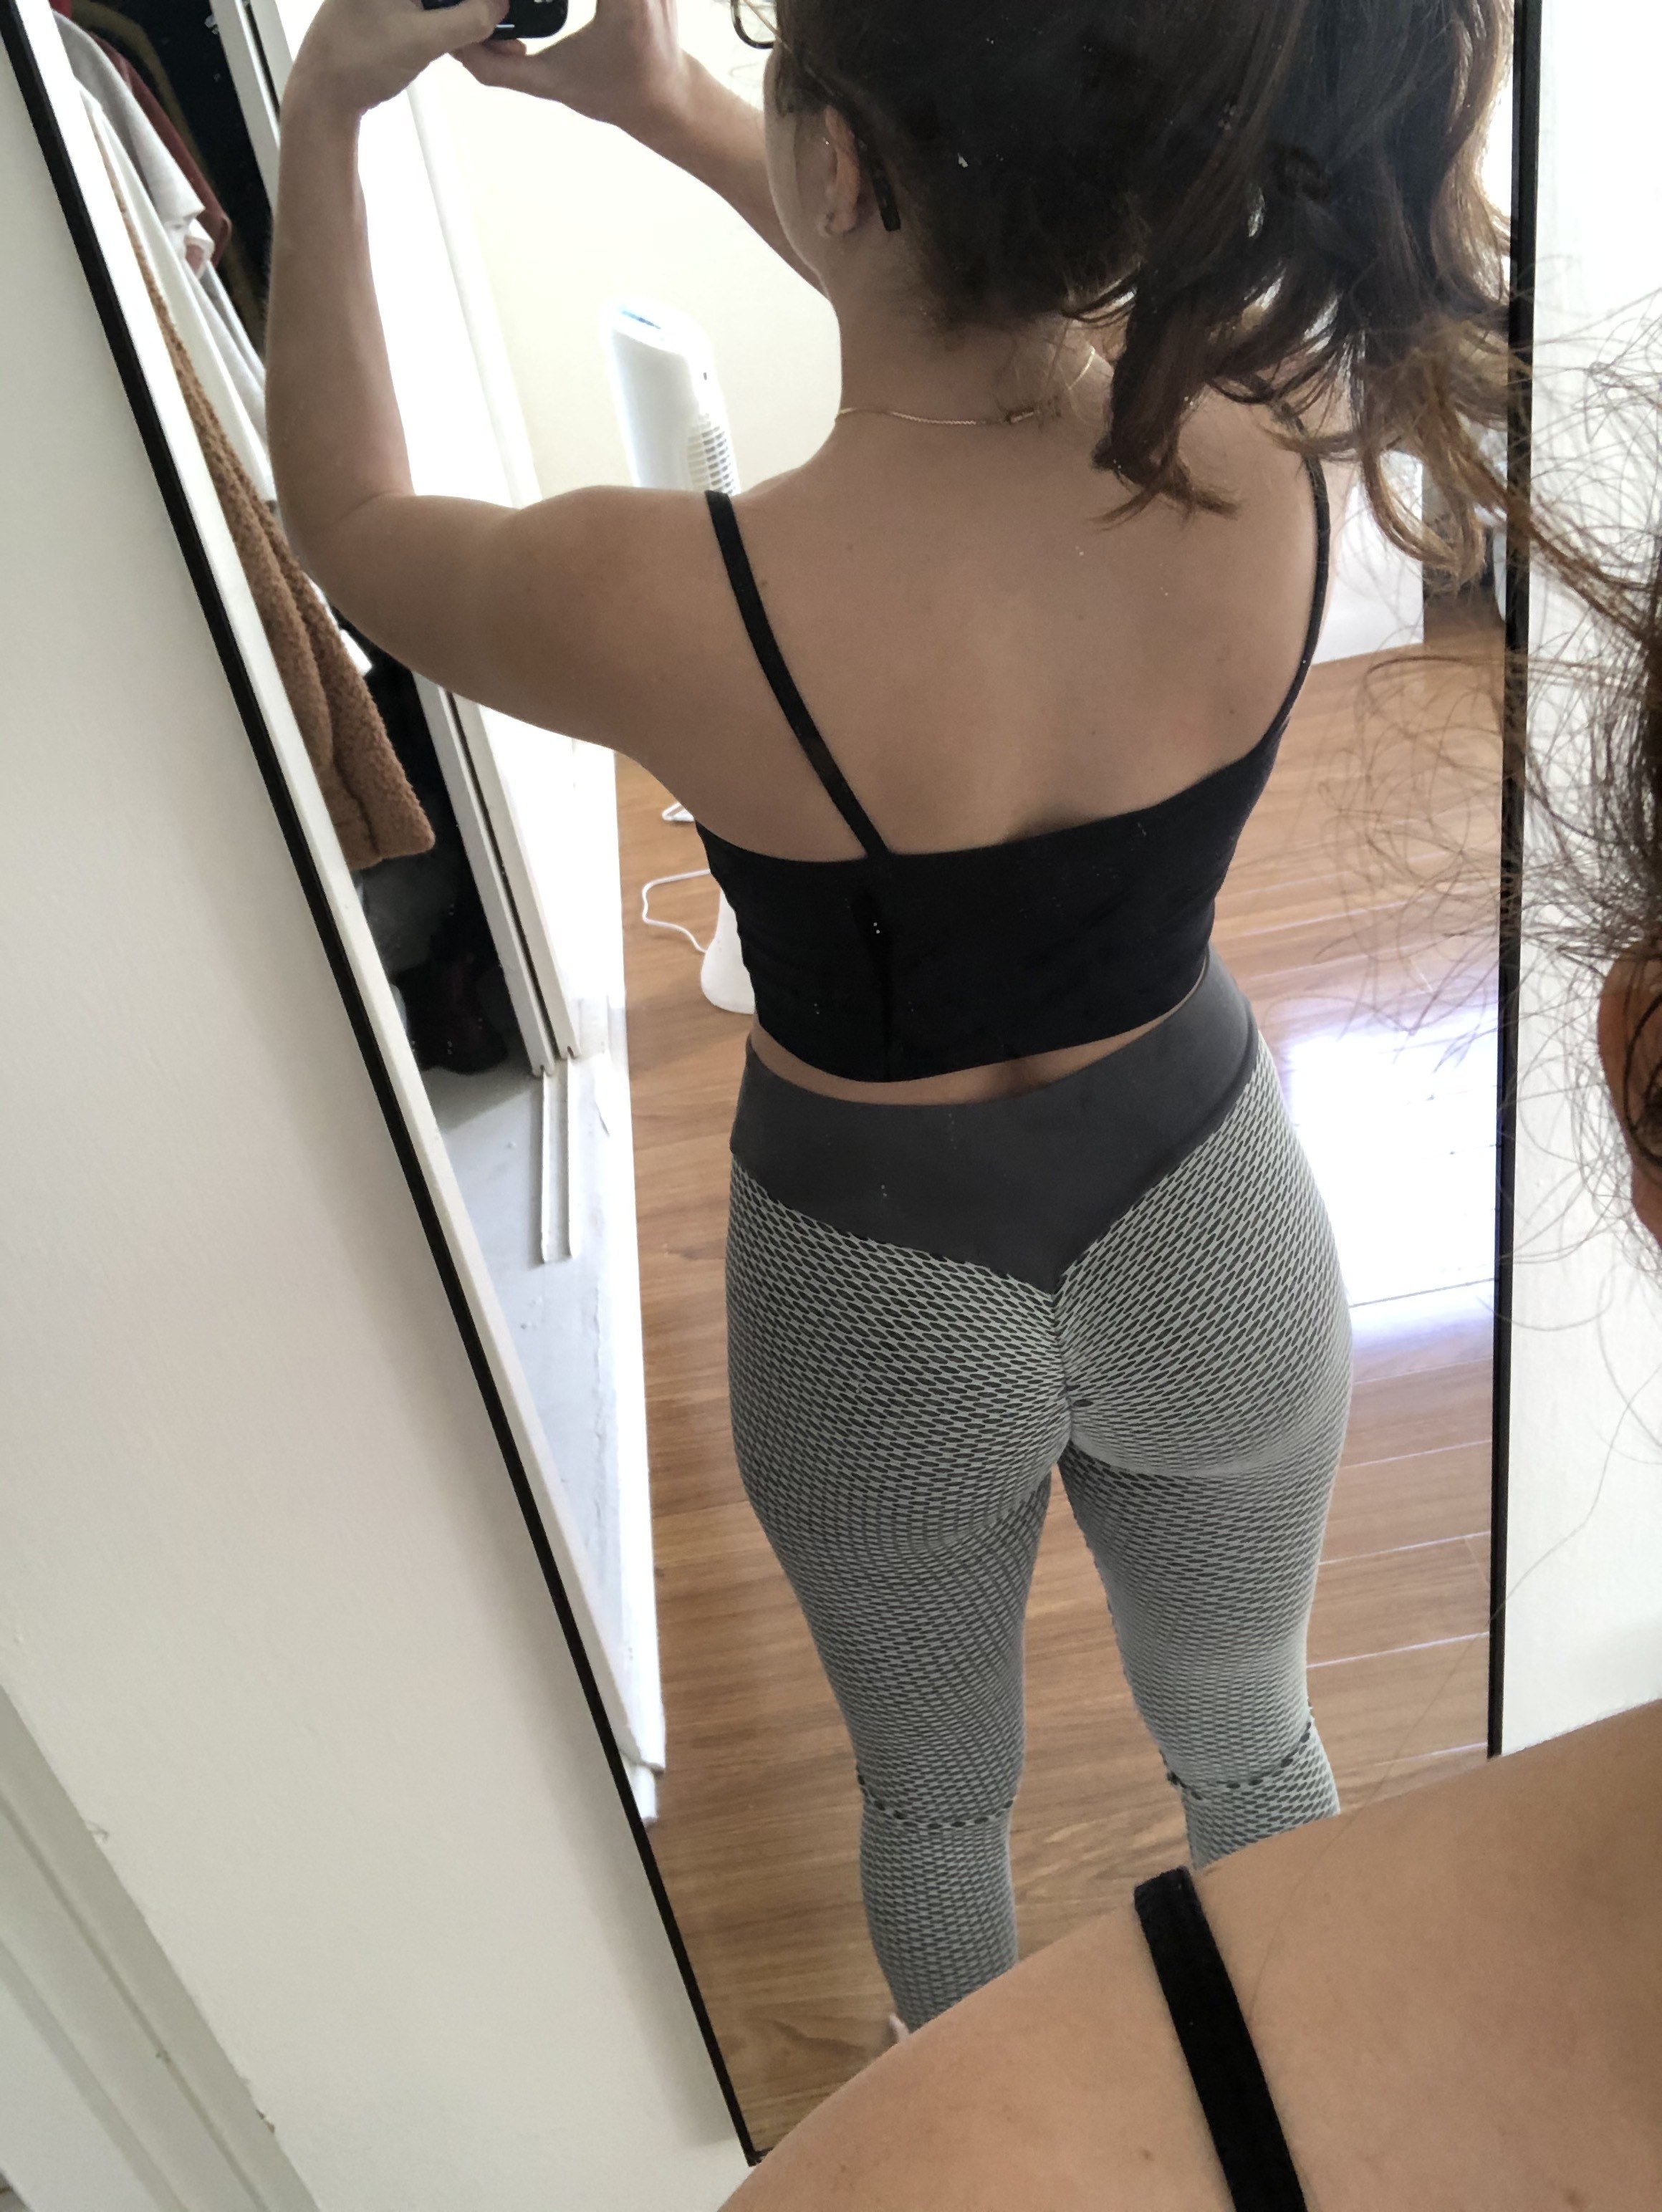 courtney bridges recommends big butt stockings pic